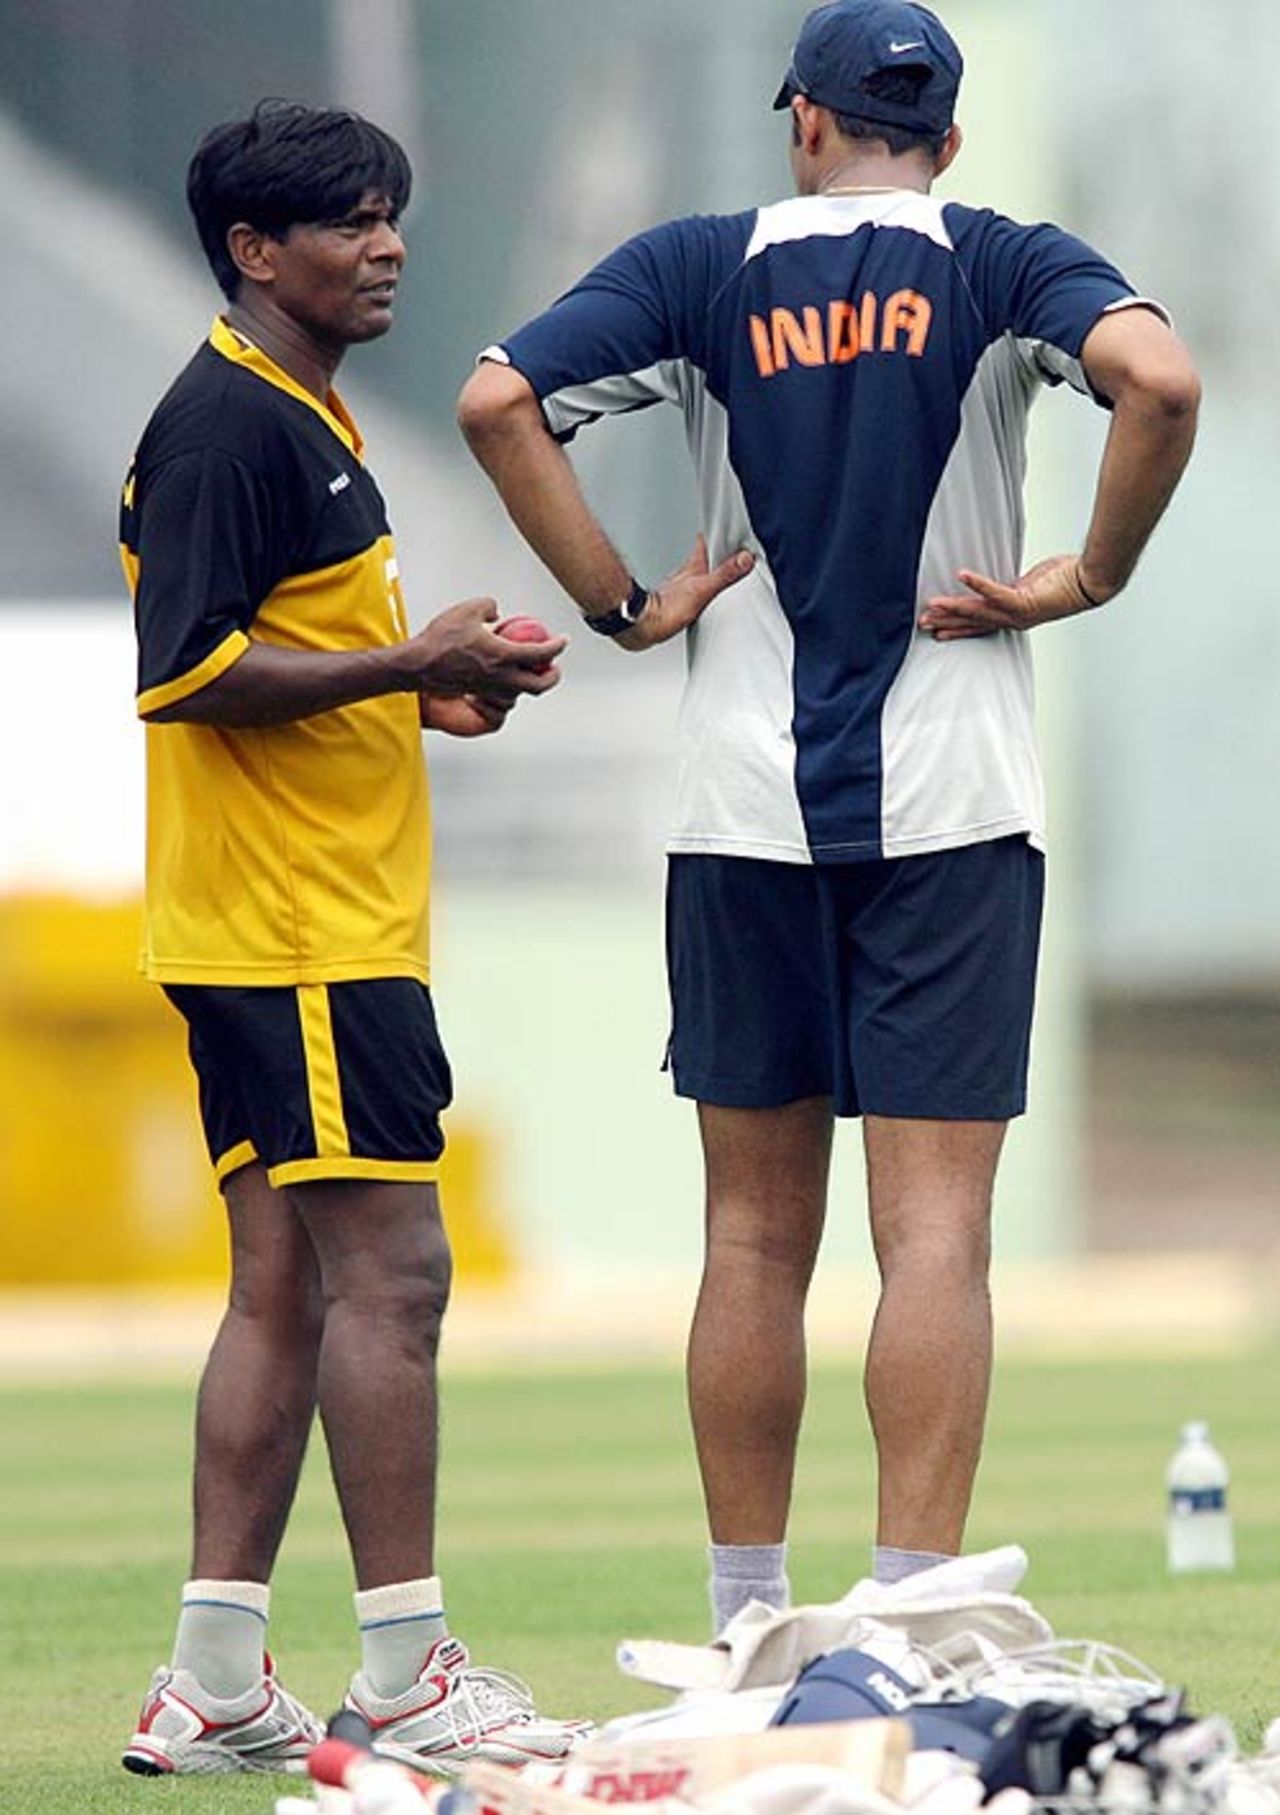 Mohammad Rafique and Anil Kumble talk about their craft, Dhaka, May 24, 2007